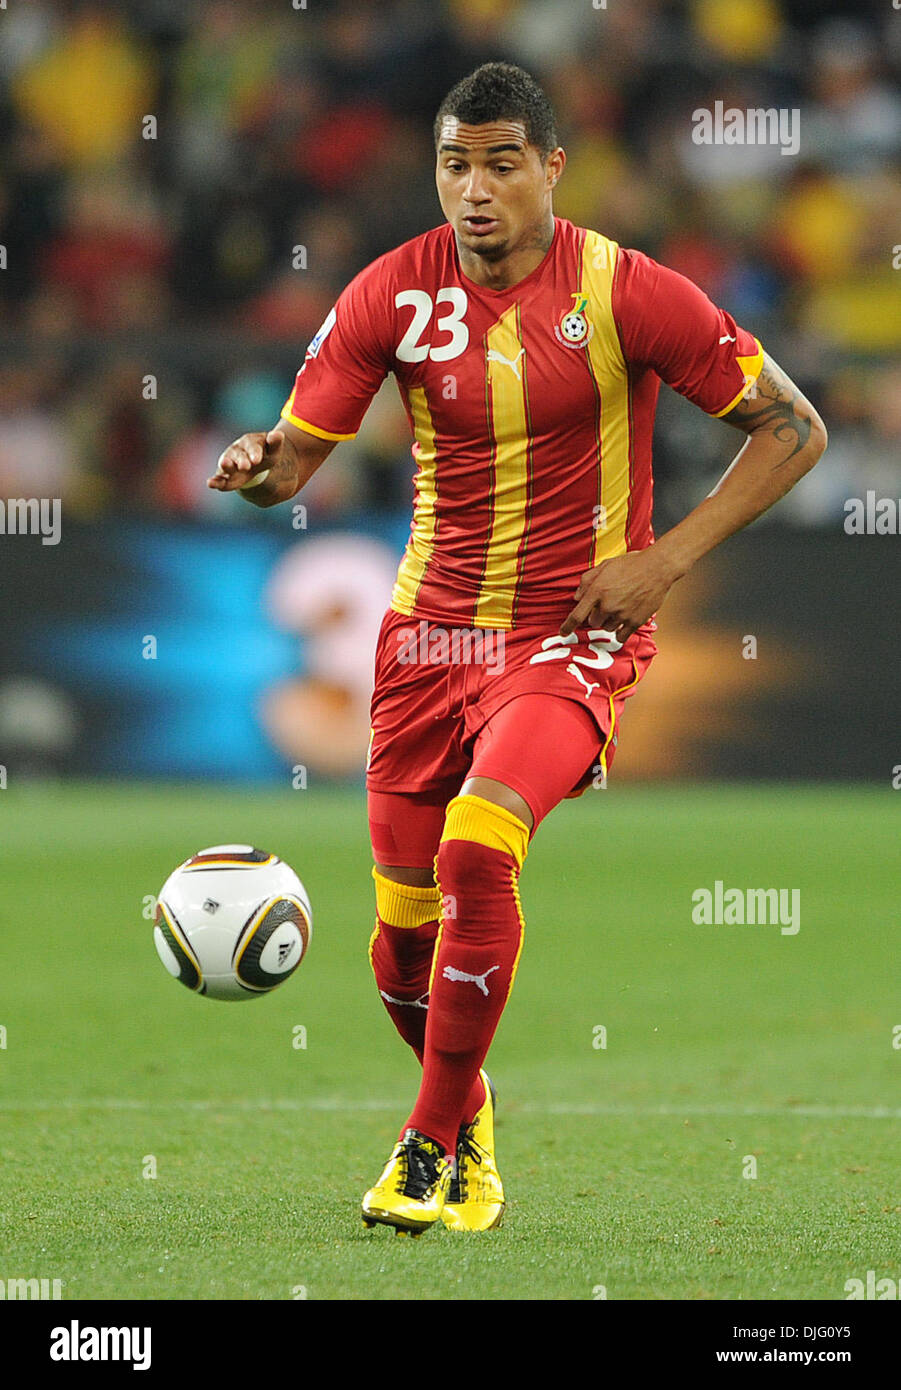 July 02, 2010 - Johannesburg, South Africa - Kevin Prince Boateng of Ghana in action during the 2010 FIFA World Cup Quarter Final soccer match between Uruguay and Ghana at Soccer City Stadium on June 02, 2010 in Johannesburg, South Africa. (Credit Image: © Luca Ghidoni/ZUMApress.com) Stock Photo